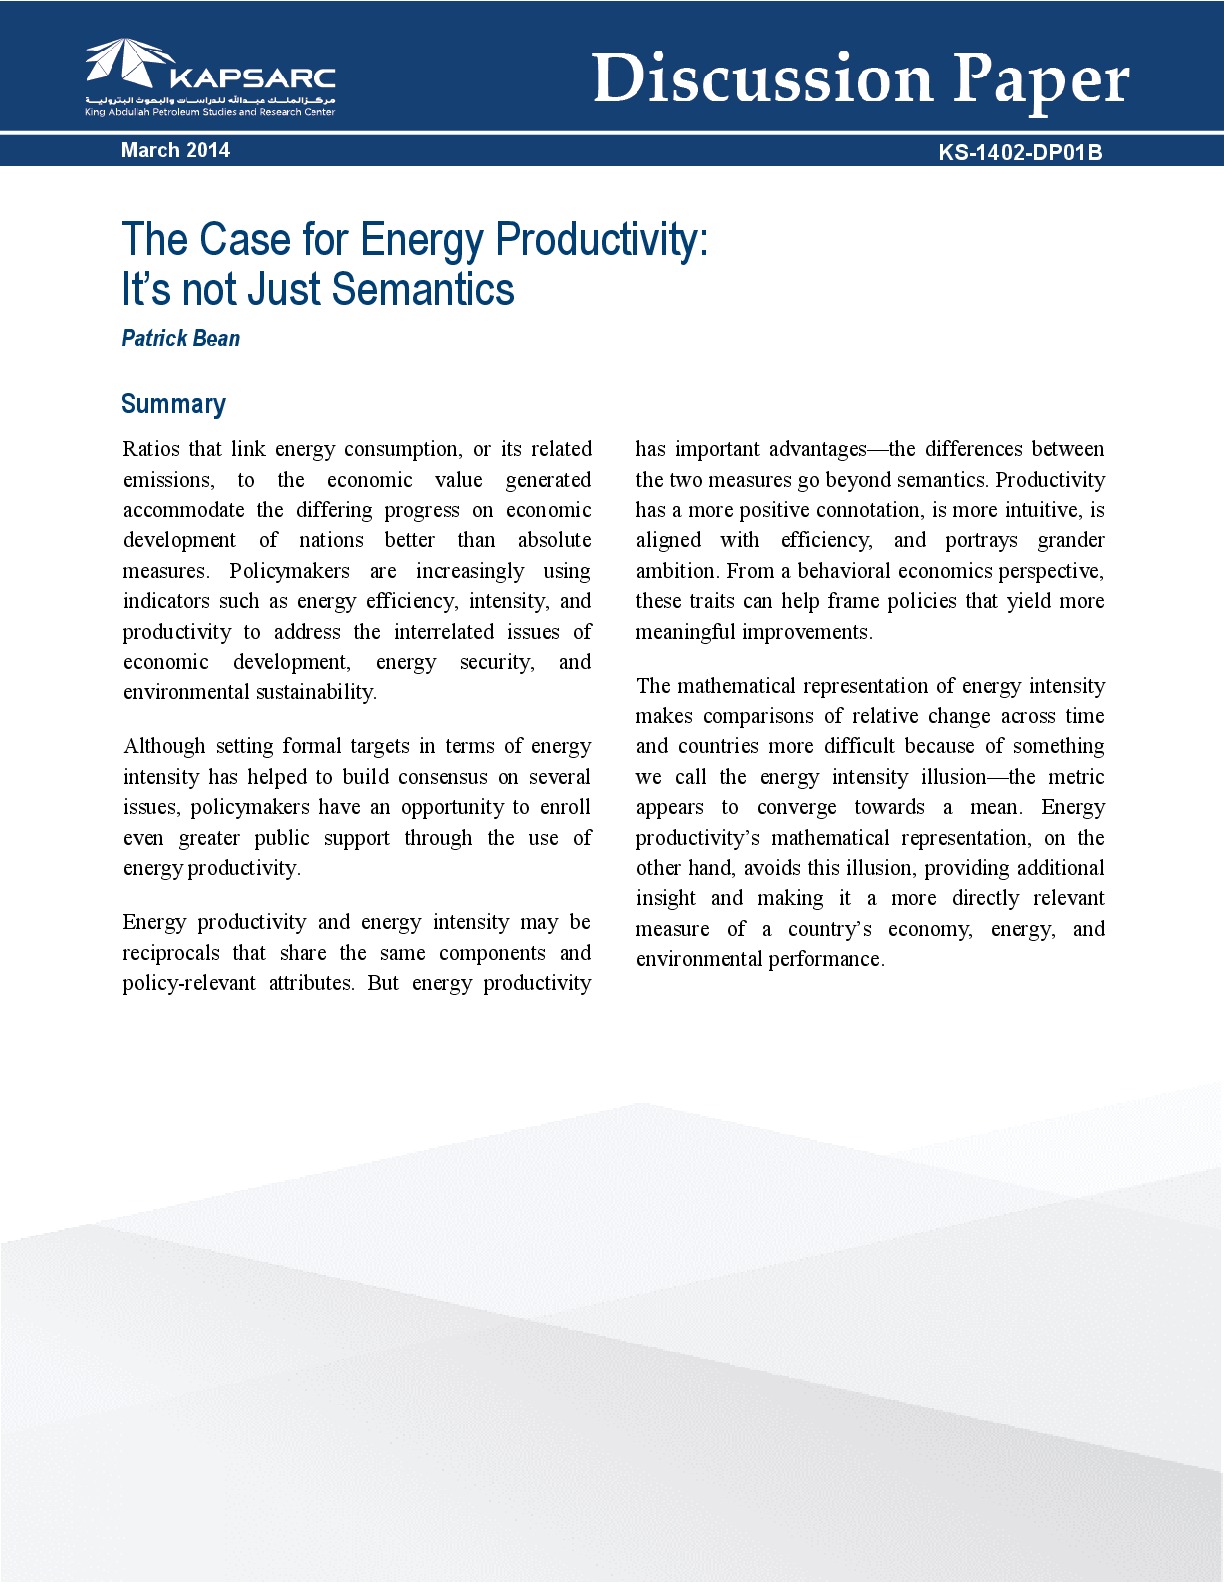 The Case for Energy Productivity: It’s Not Just Semantics